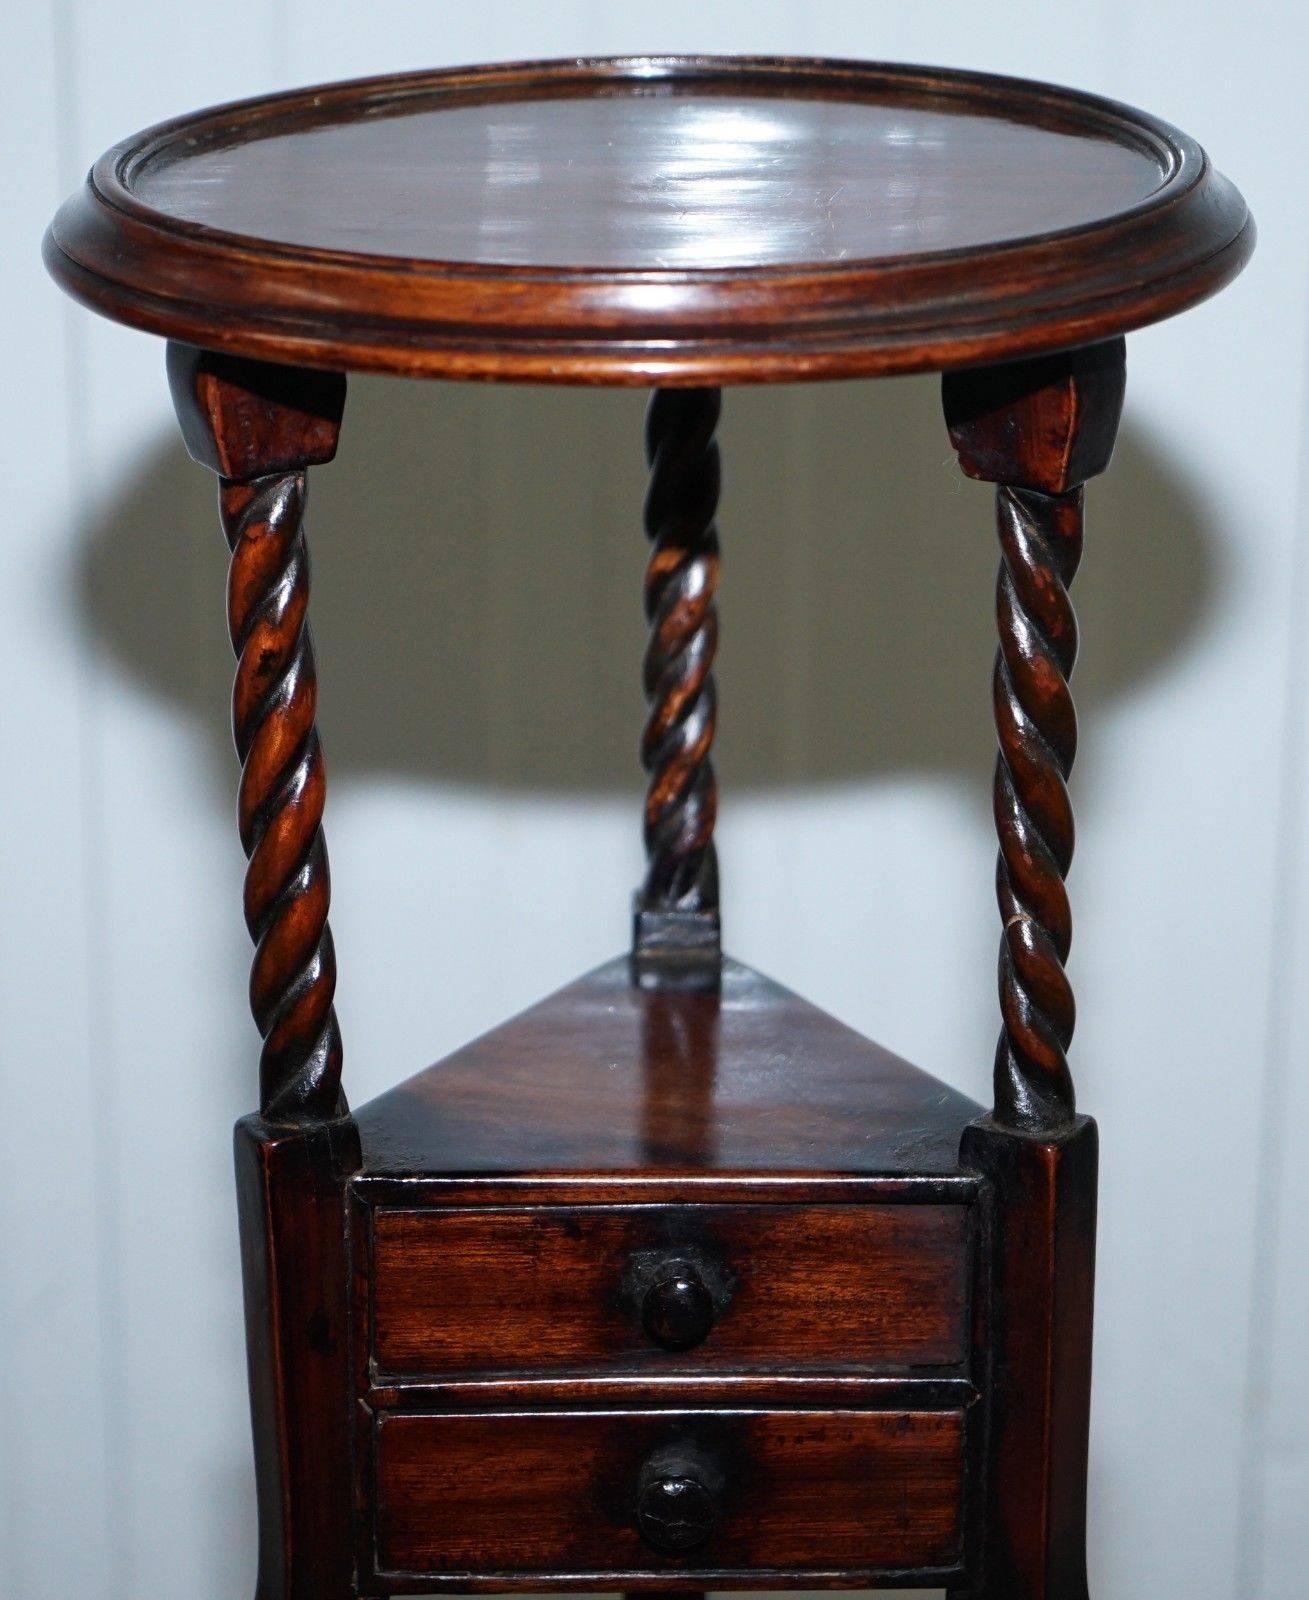 Regency 1 of 2 George III Style Mahogany Jardinière Display Stands with Two Faux Drawers